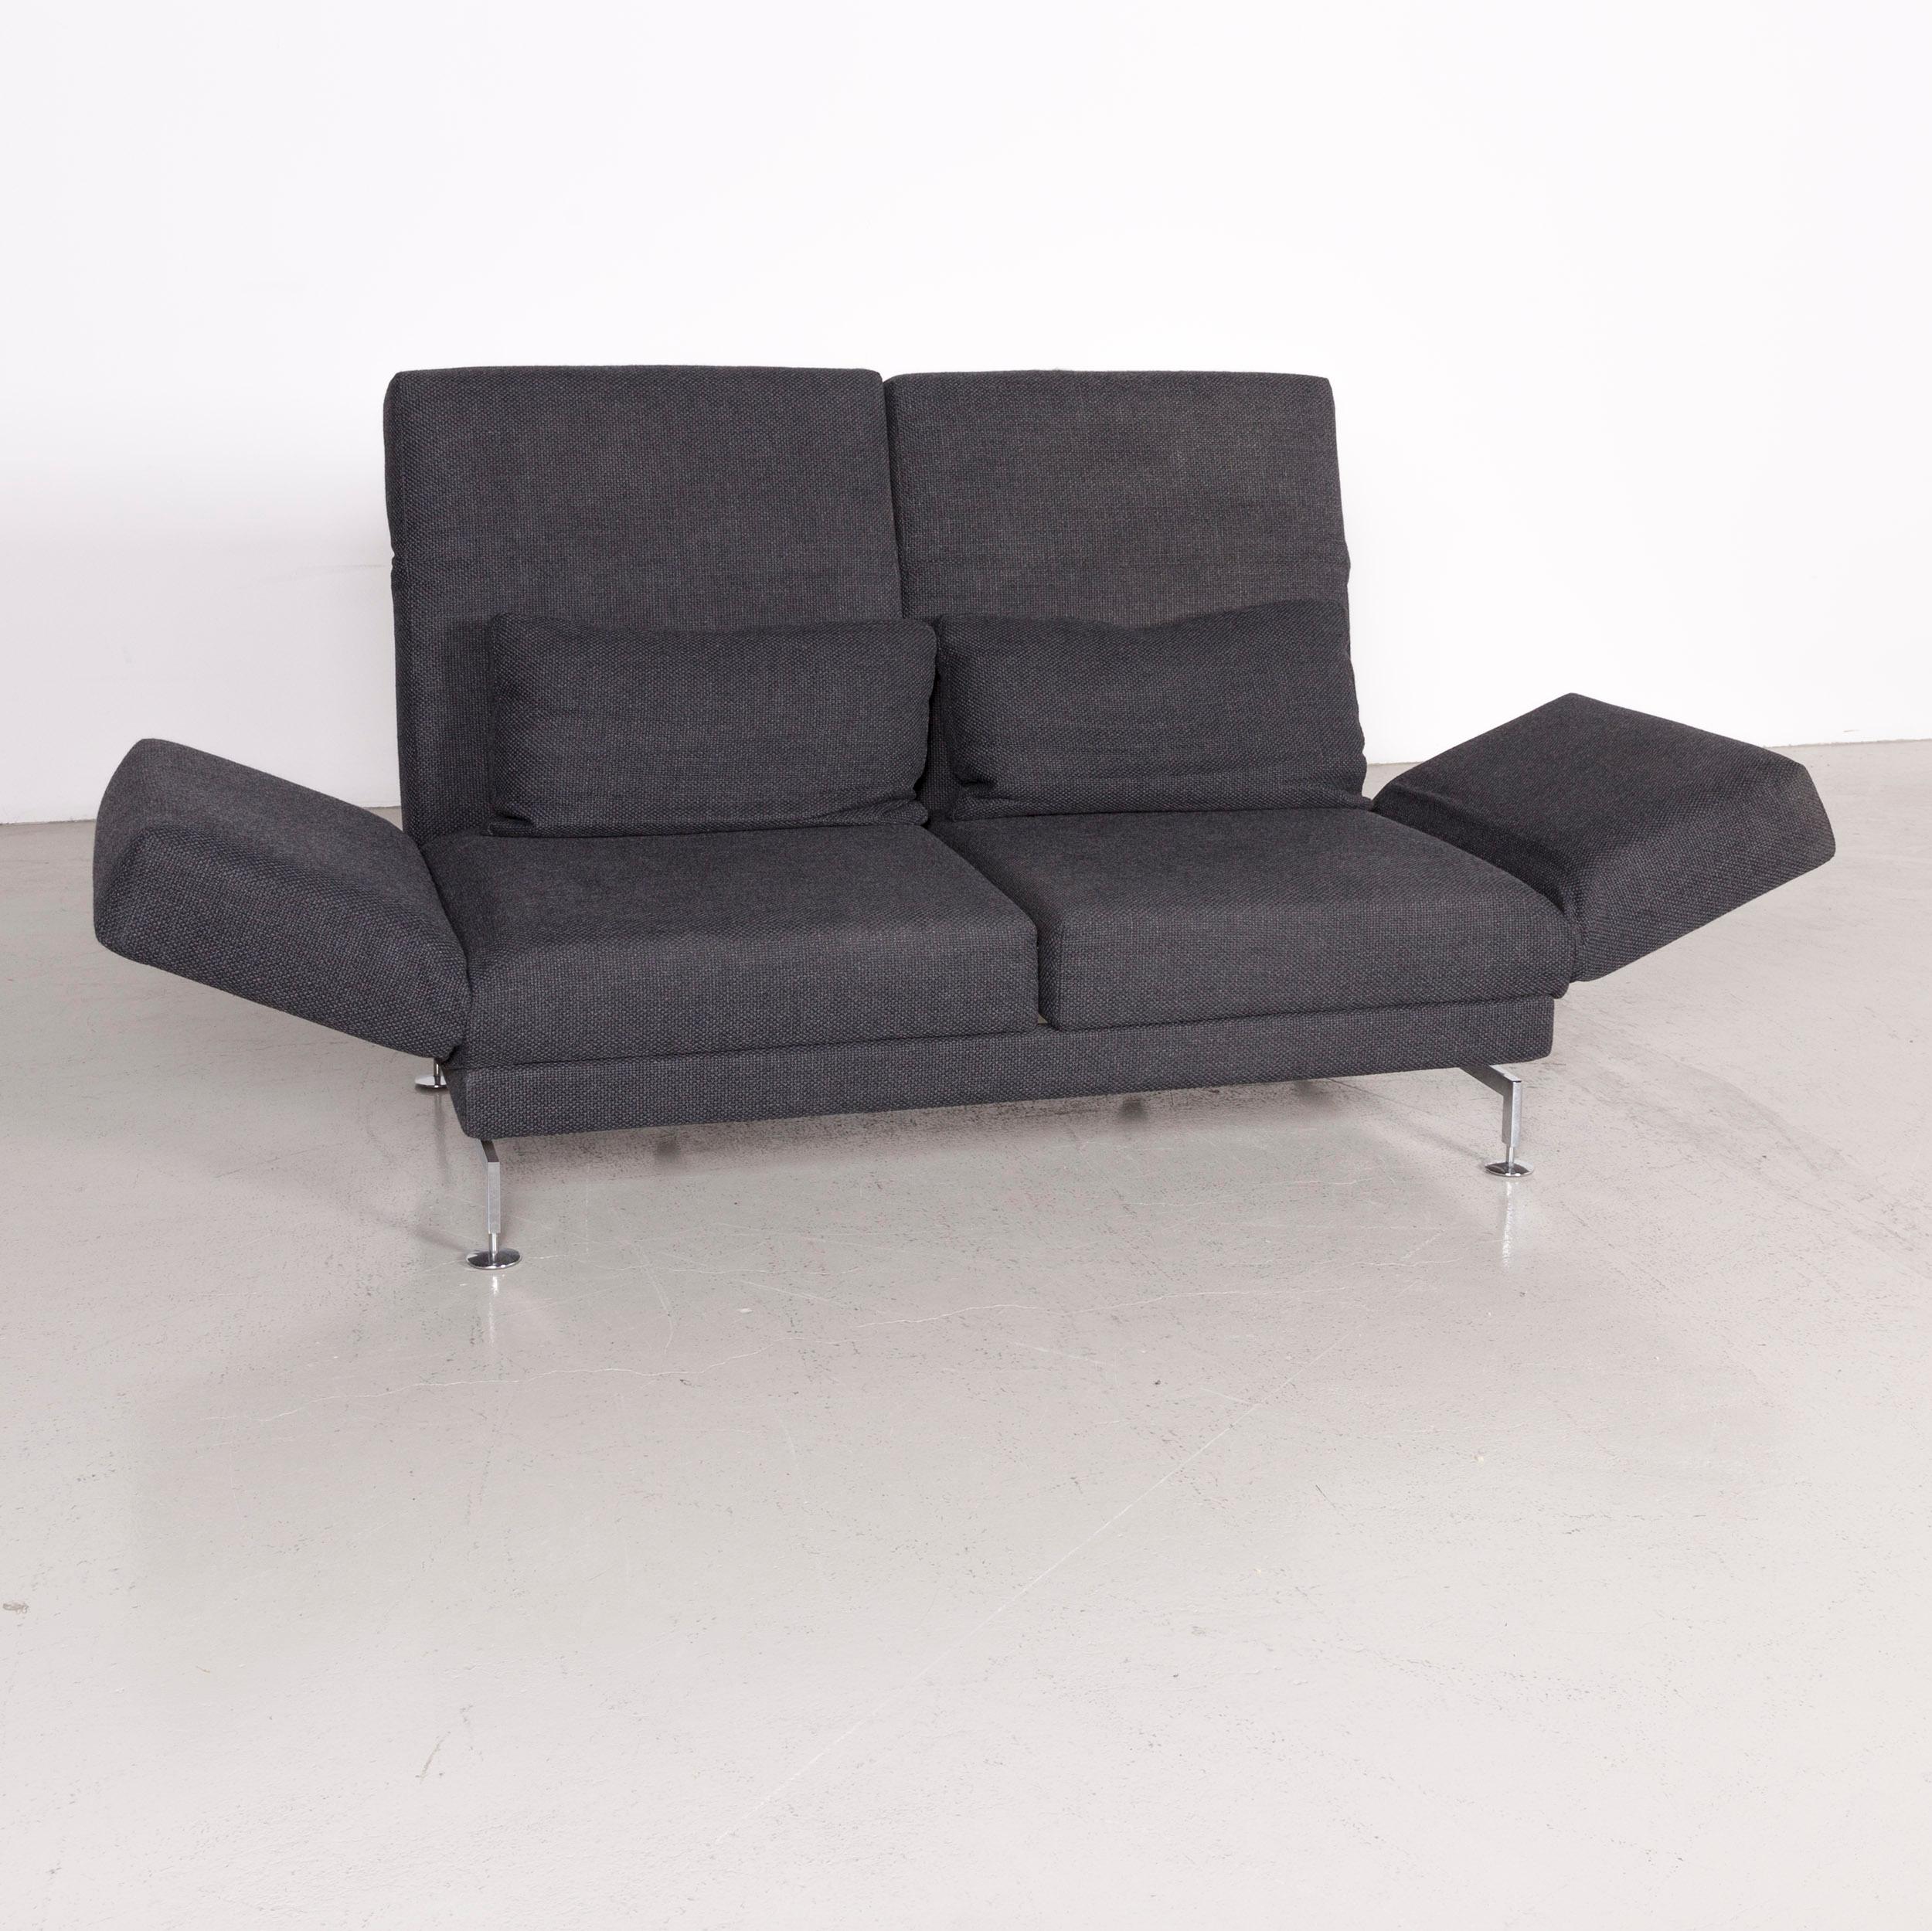 Brühl & Sippold Moule designer fabric sofa grey three-seat couch with function.